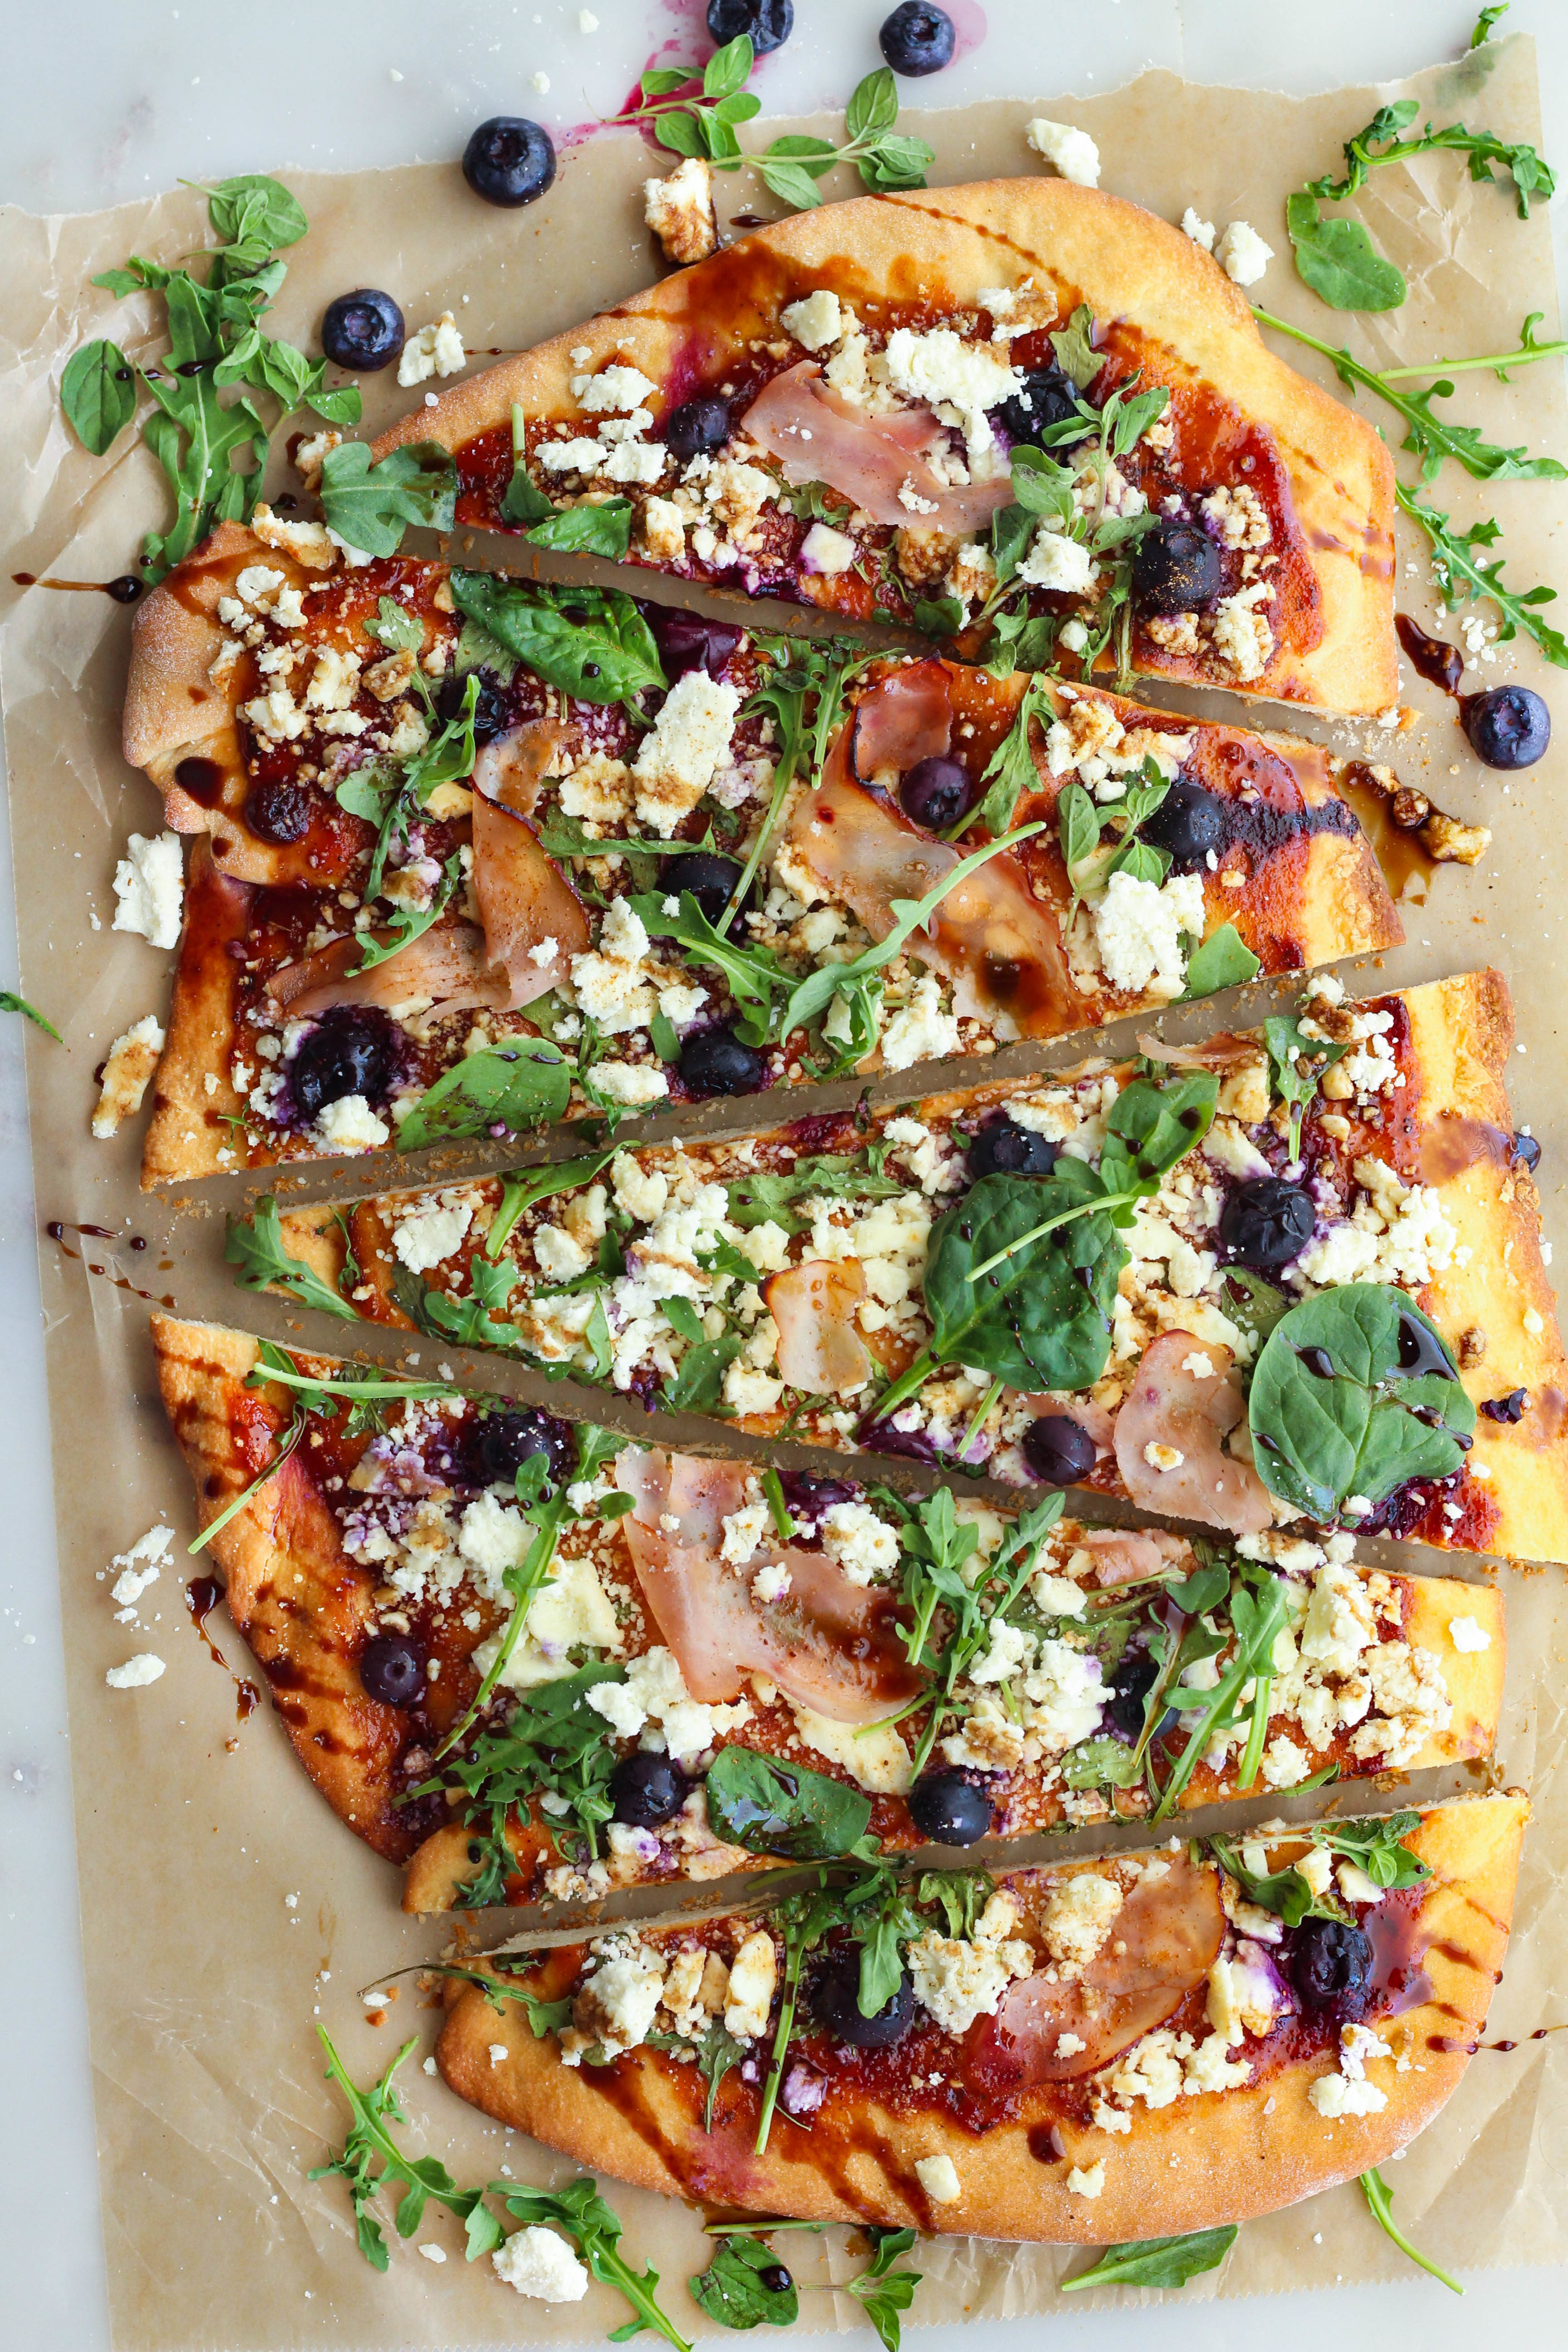 BBQ Feta & Blueberry Flatbread - The Sweet and Simple Kitchen